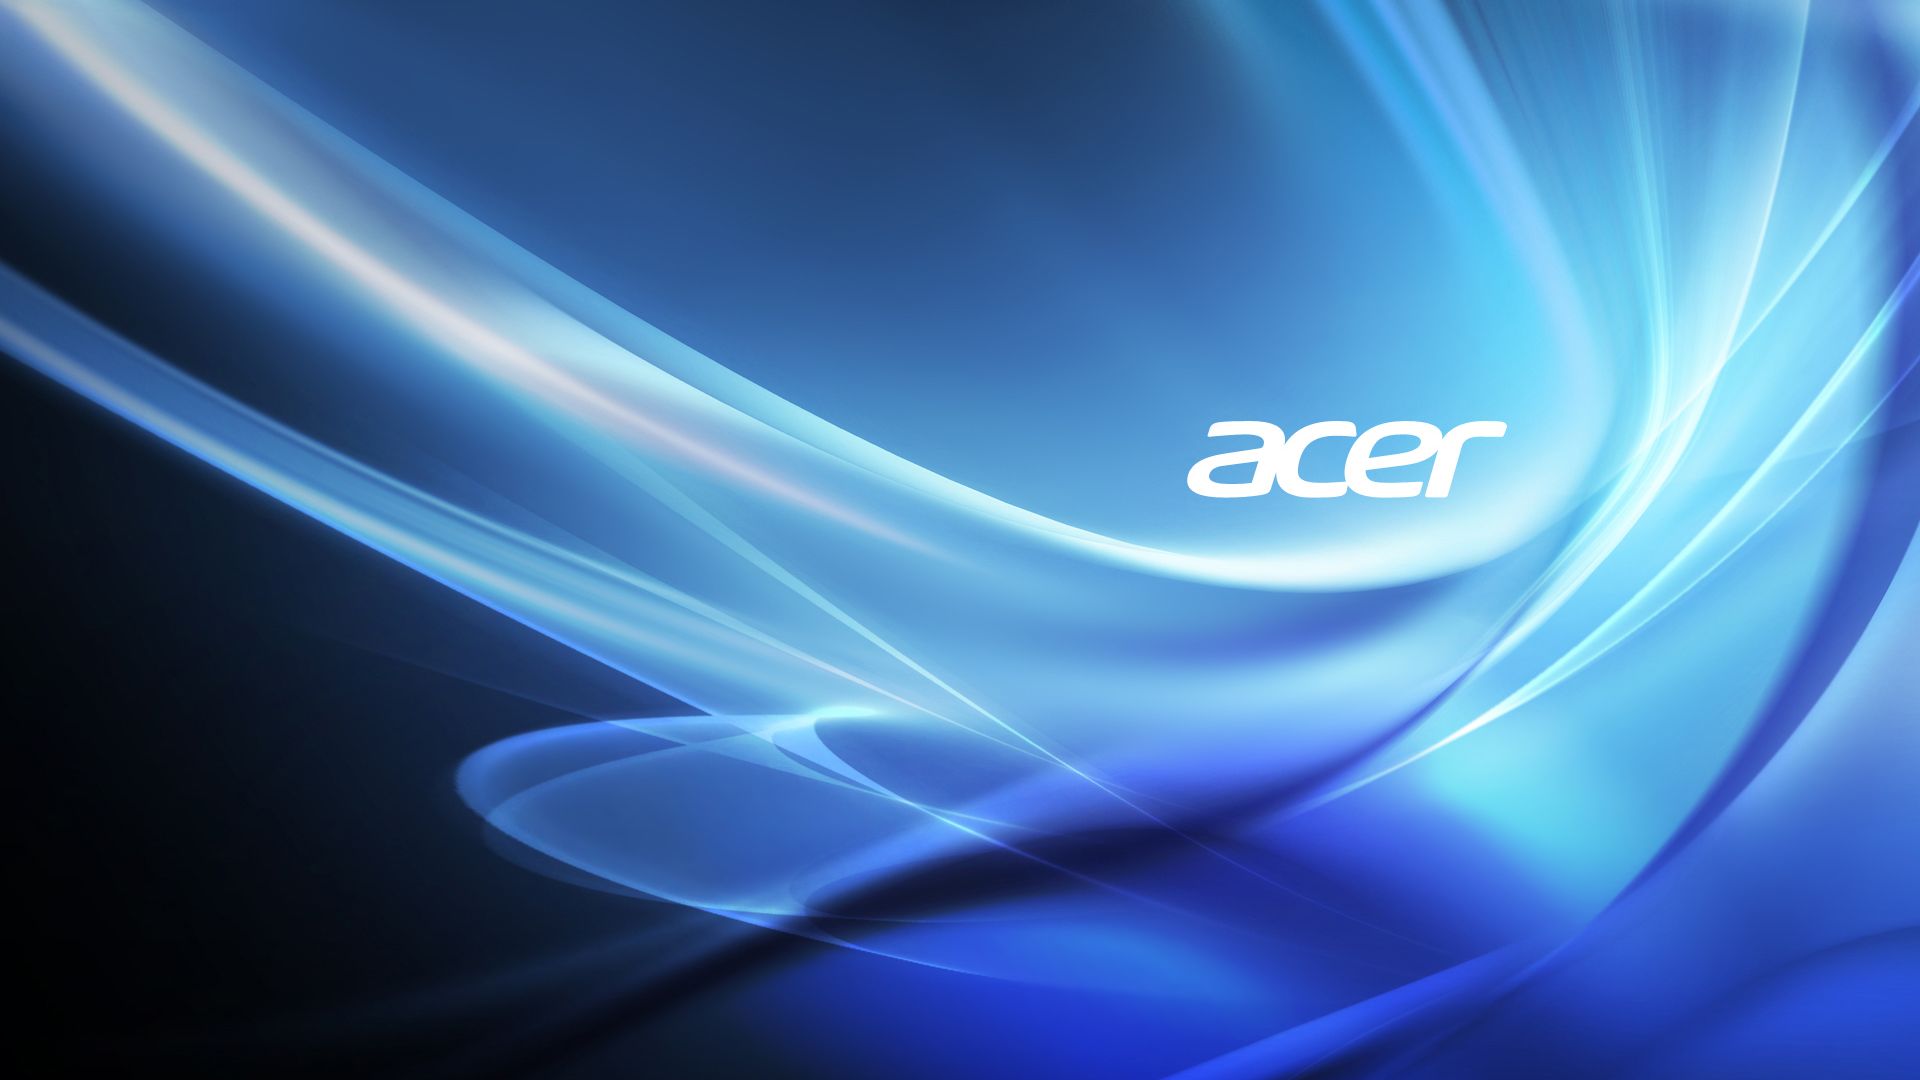 Free Download Acer Logo HD 06 (49889) Full Size | Wallpaperres.com